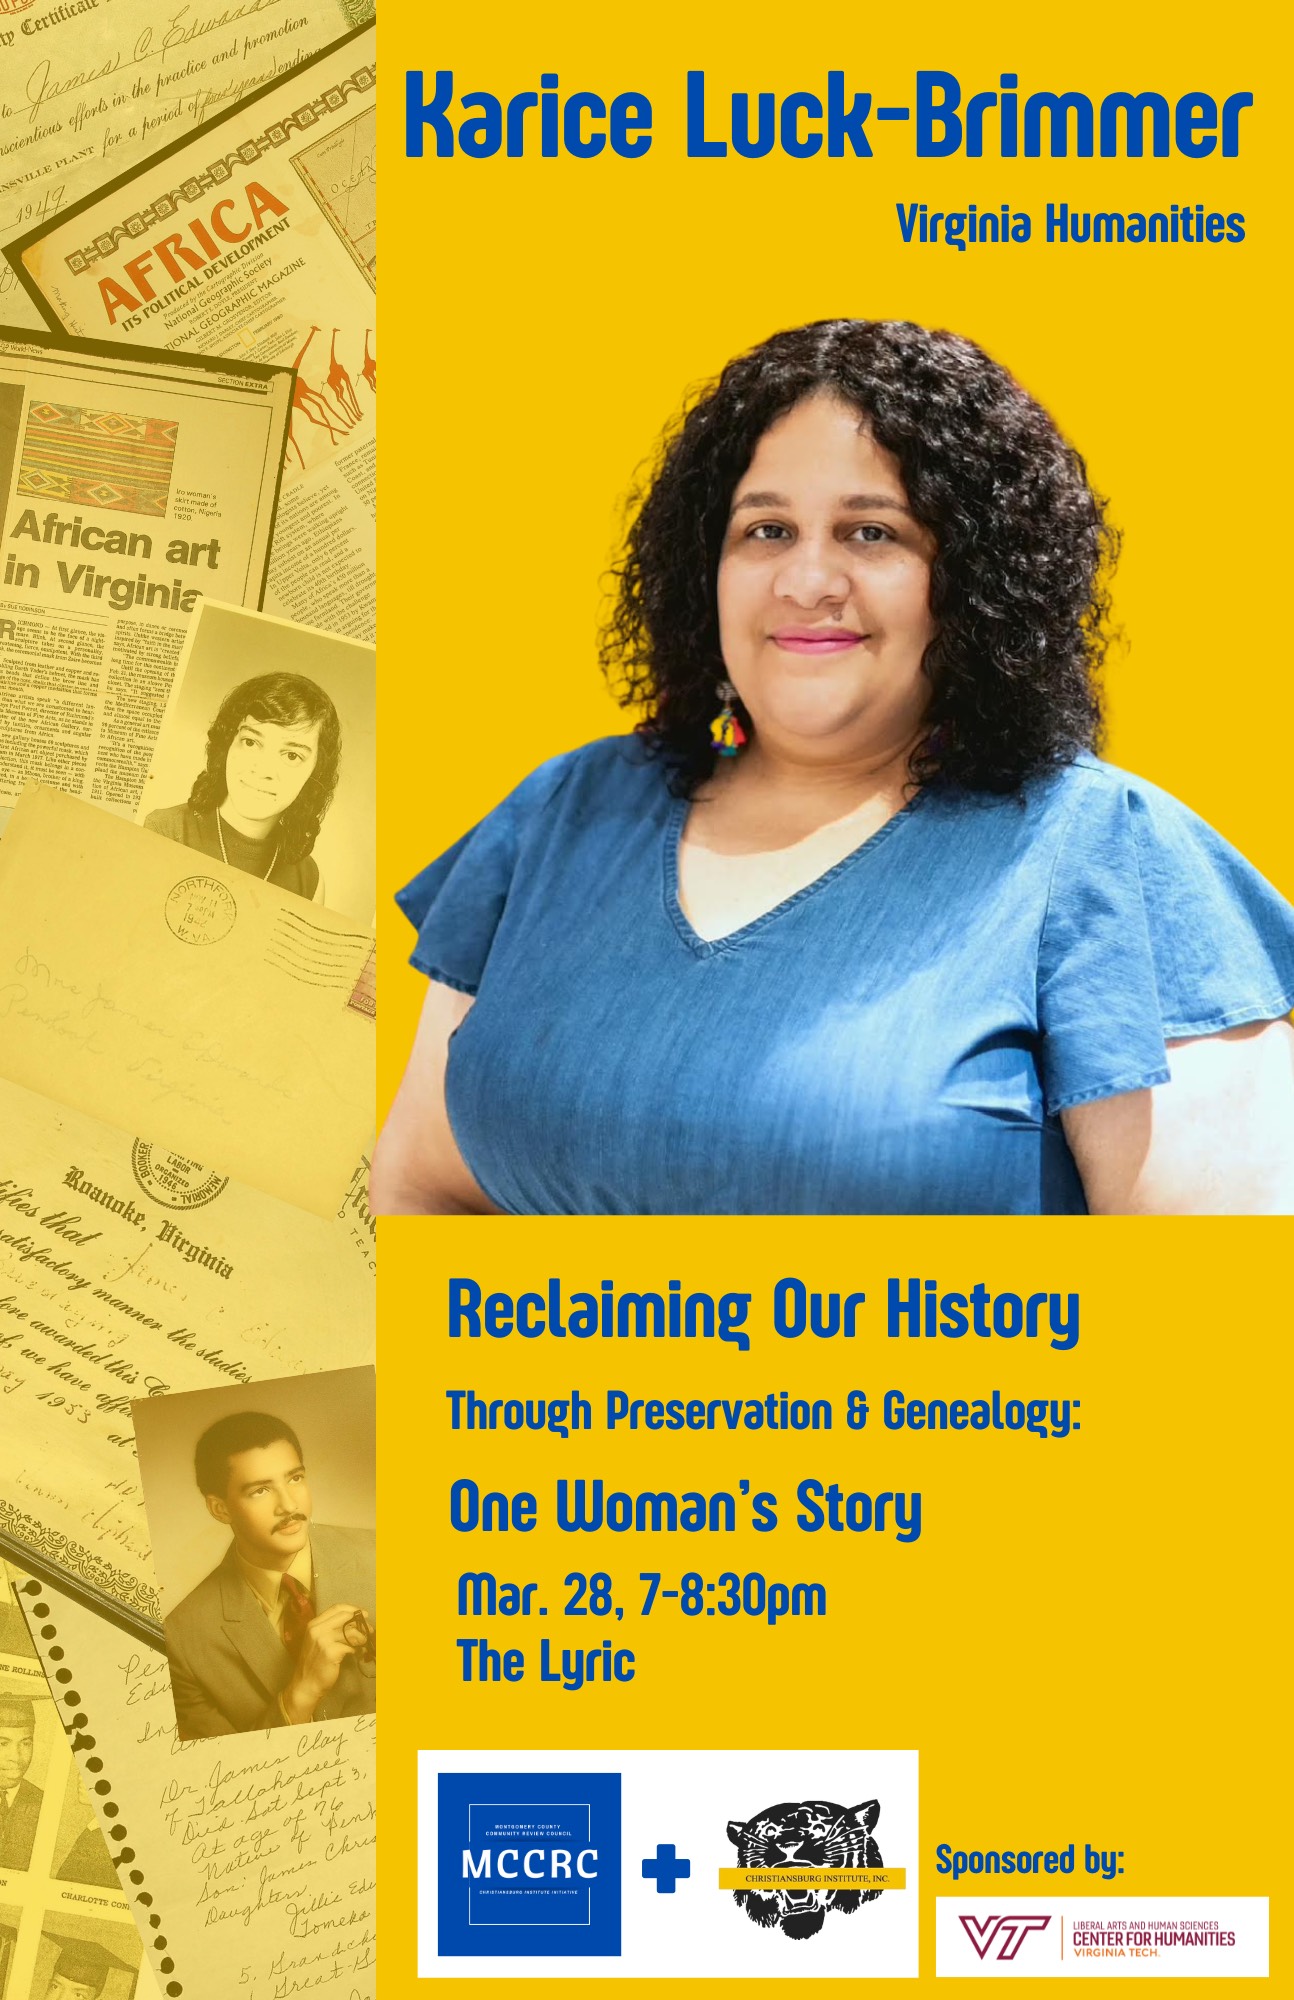 Reclaiming Our History Through Preservation & Genealogy: One Woman